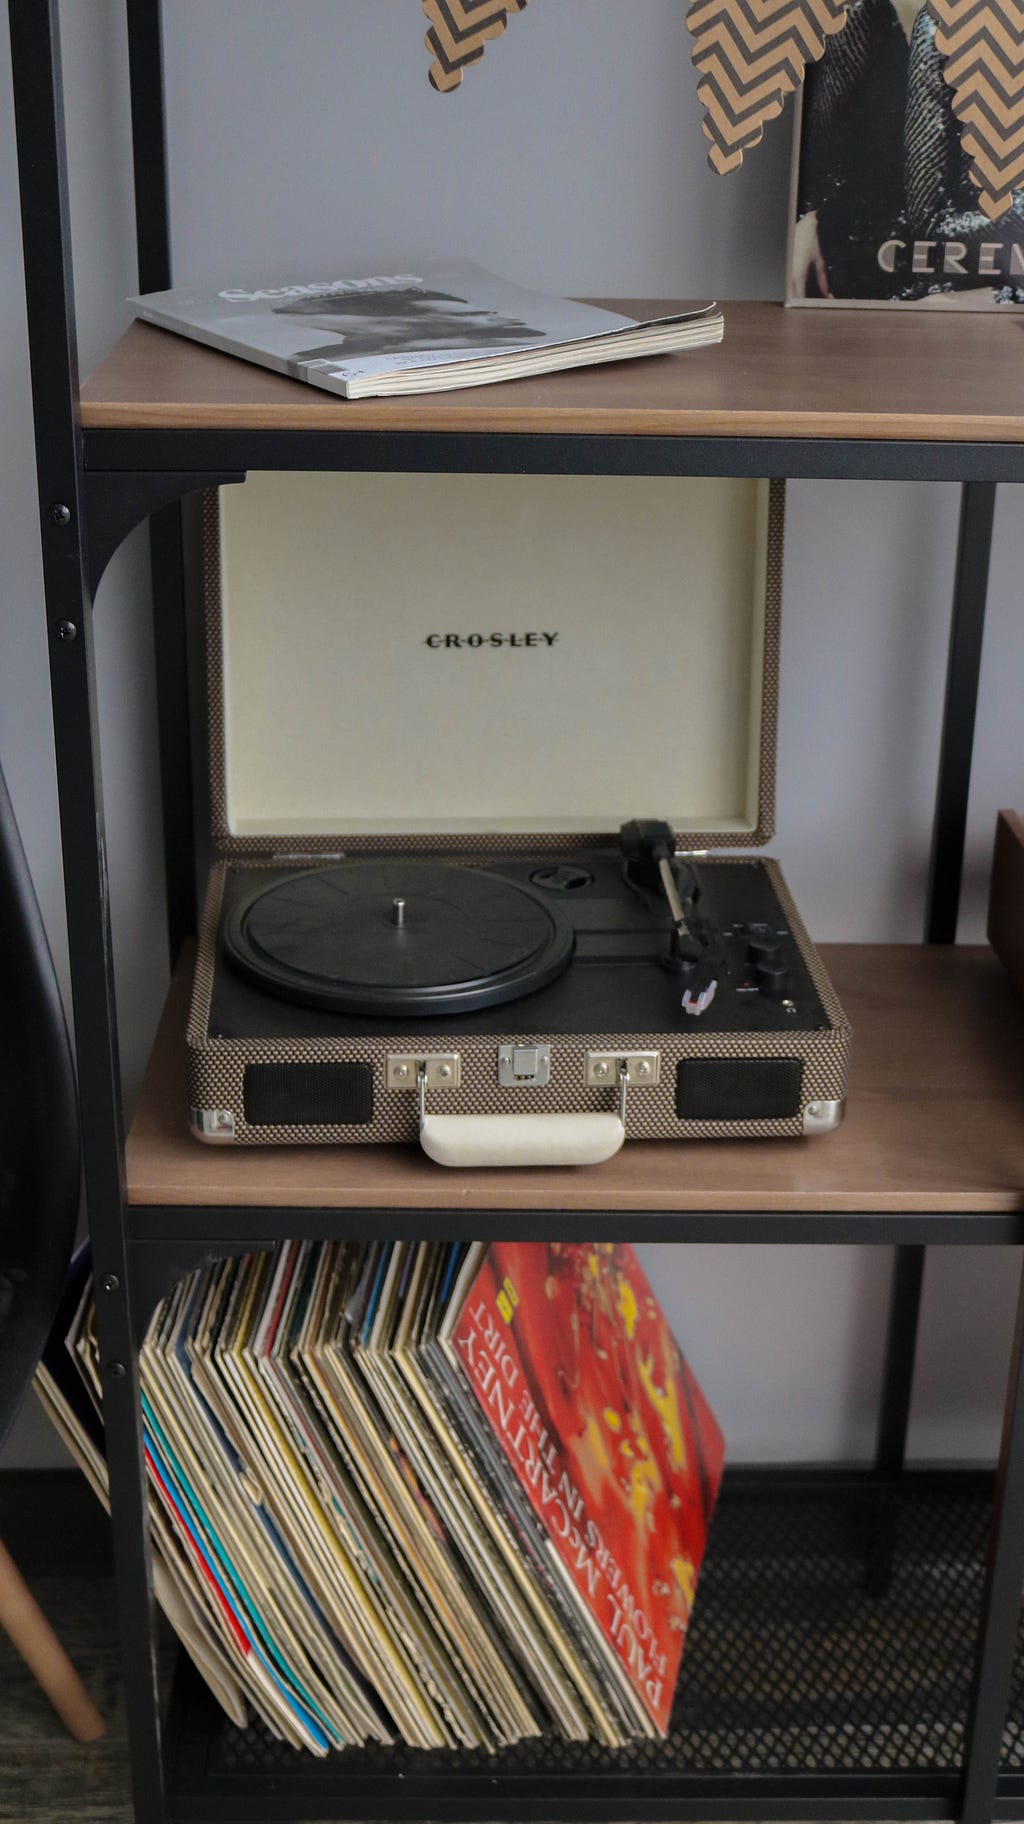 Old record player on a middle shelf with multiple vinyl records below and a book above